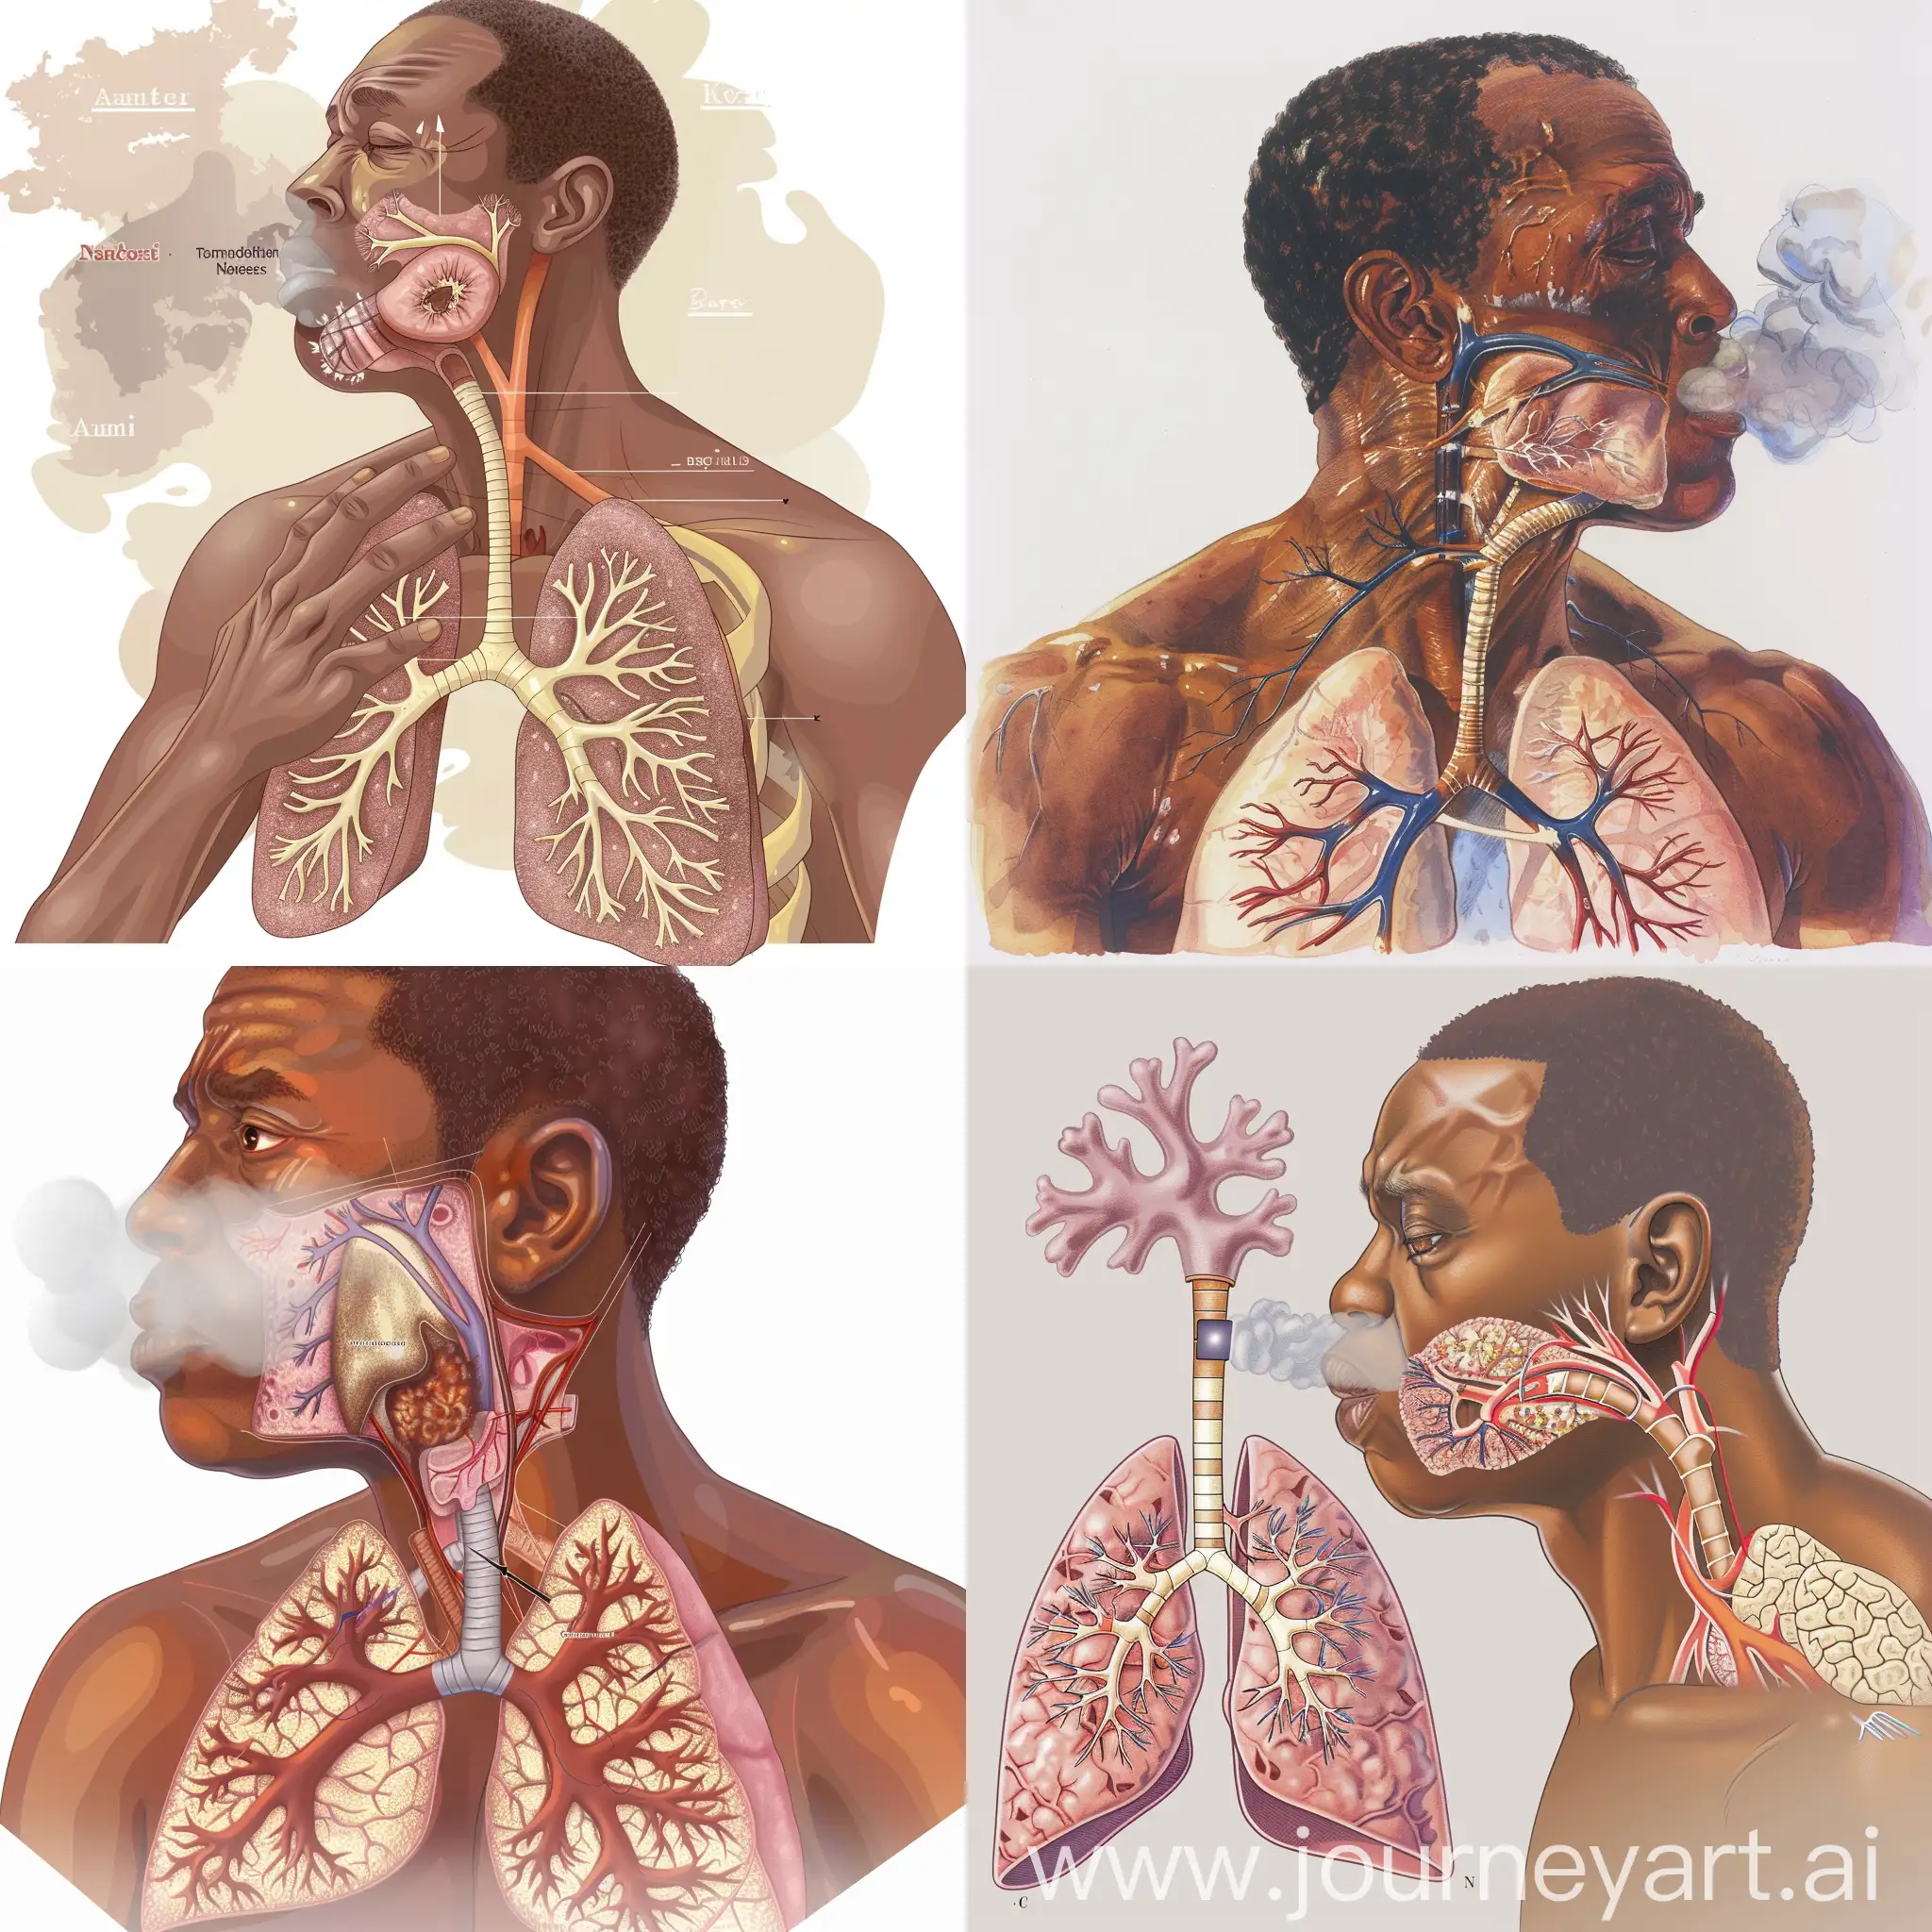 show a Diagram of the respiratory system, highlighting the inflamed and narrowed airways in the lungs due to asthma. include a coughing black american